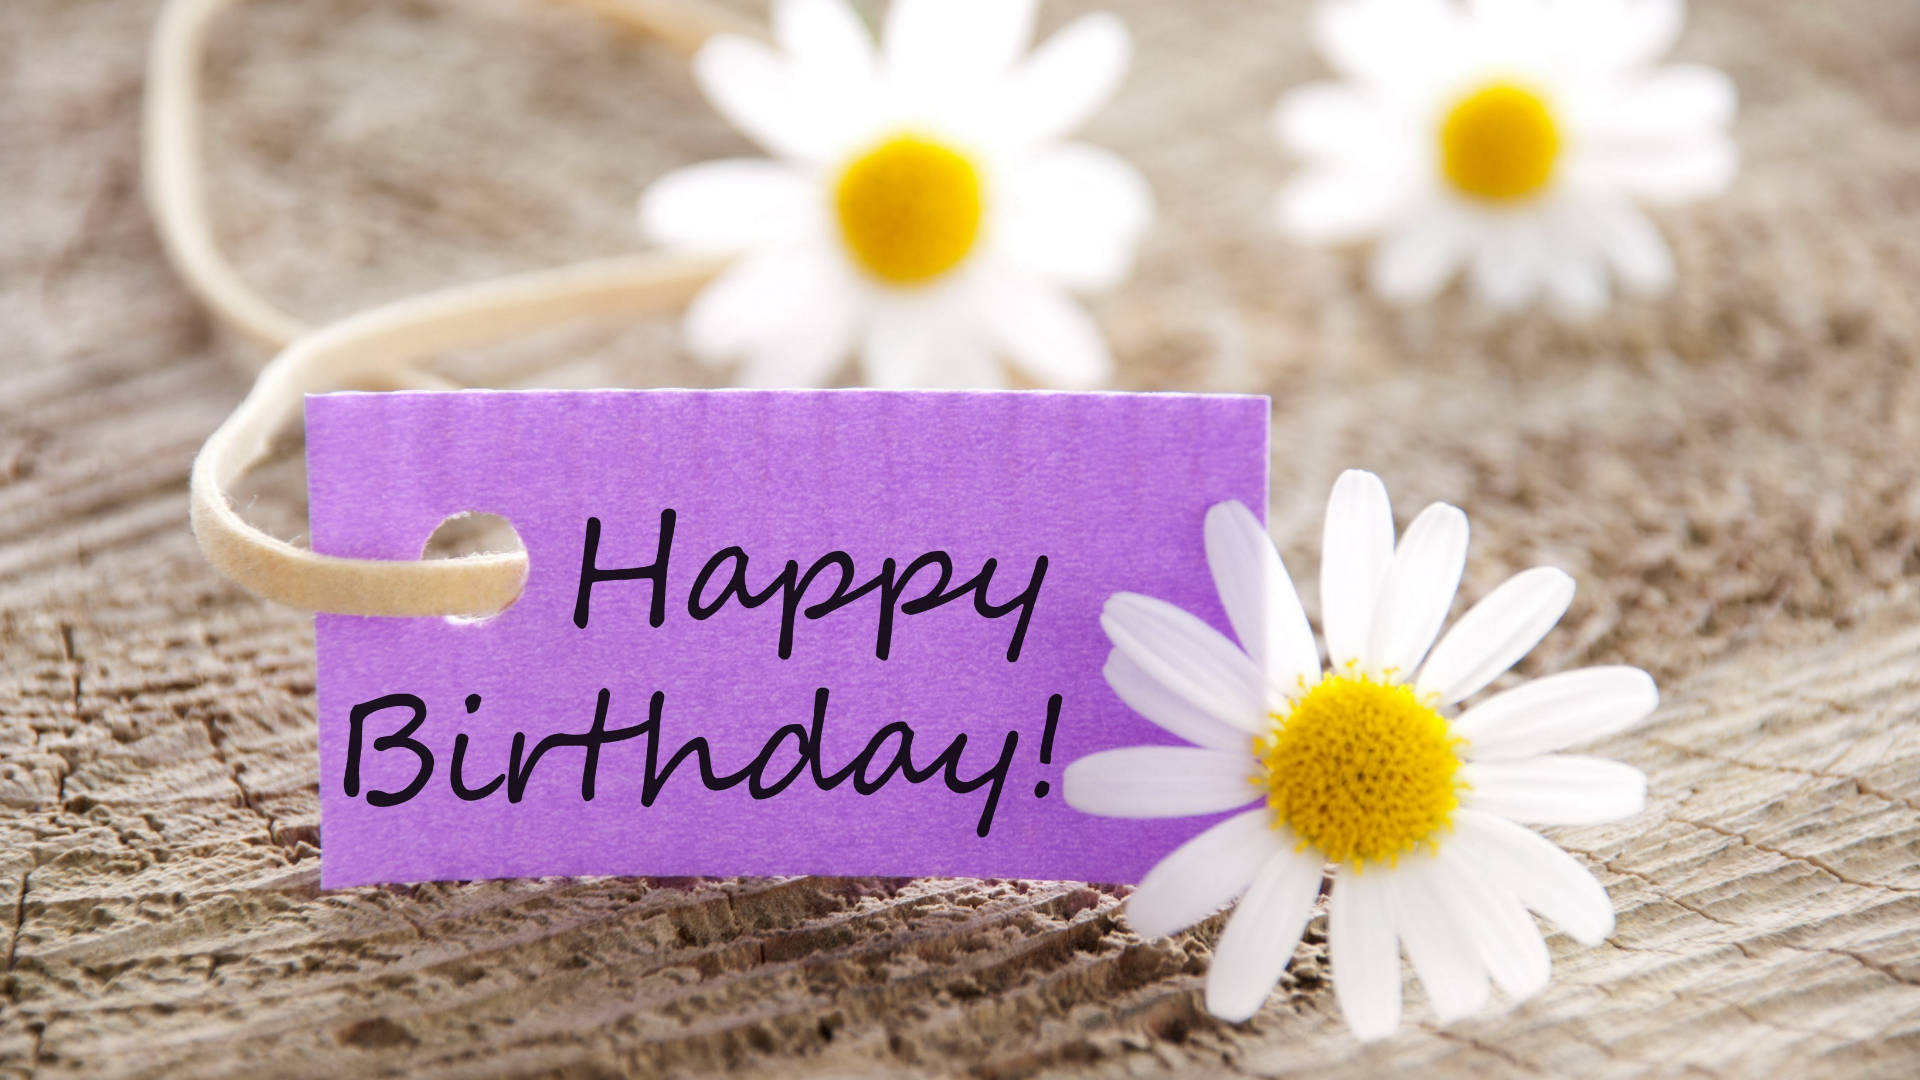 Happy Birthday Flower Dasies With Card Wallpaper